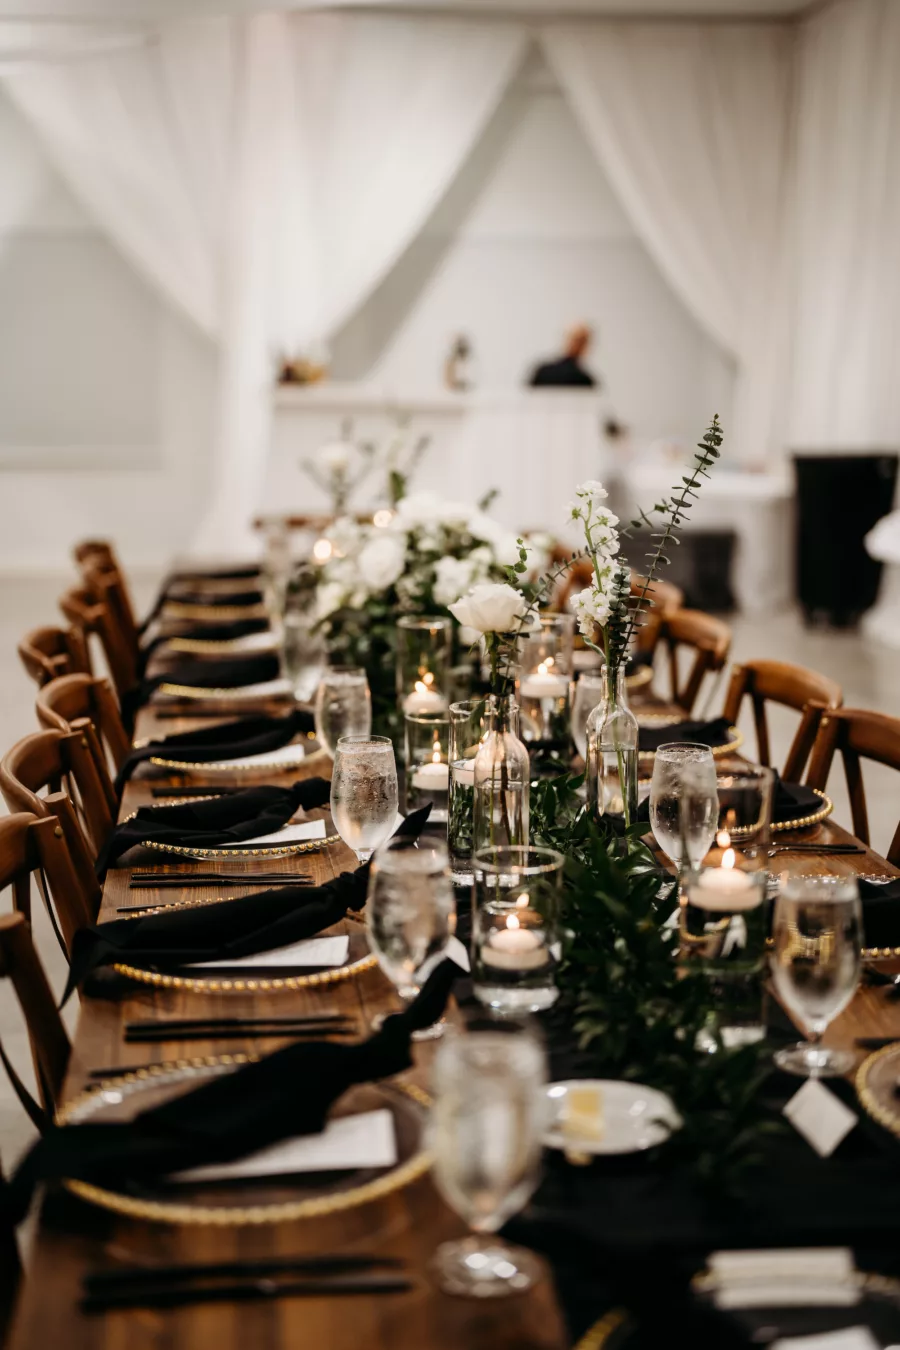 Elegant Rustic Black Wedding Reception Tablescape Ideas | Wooden Feasting Tables, Crossback Chairs | Tampa Bay Event Caterer Events Done Right